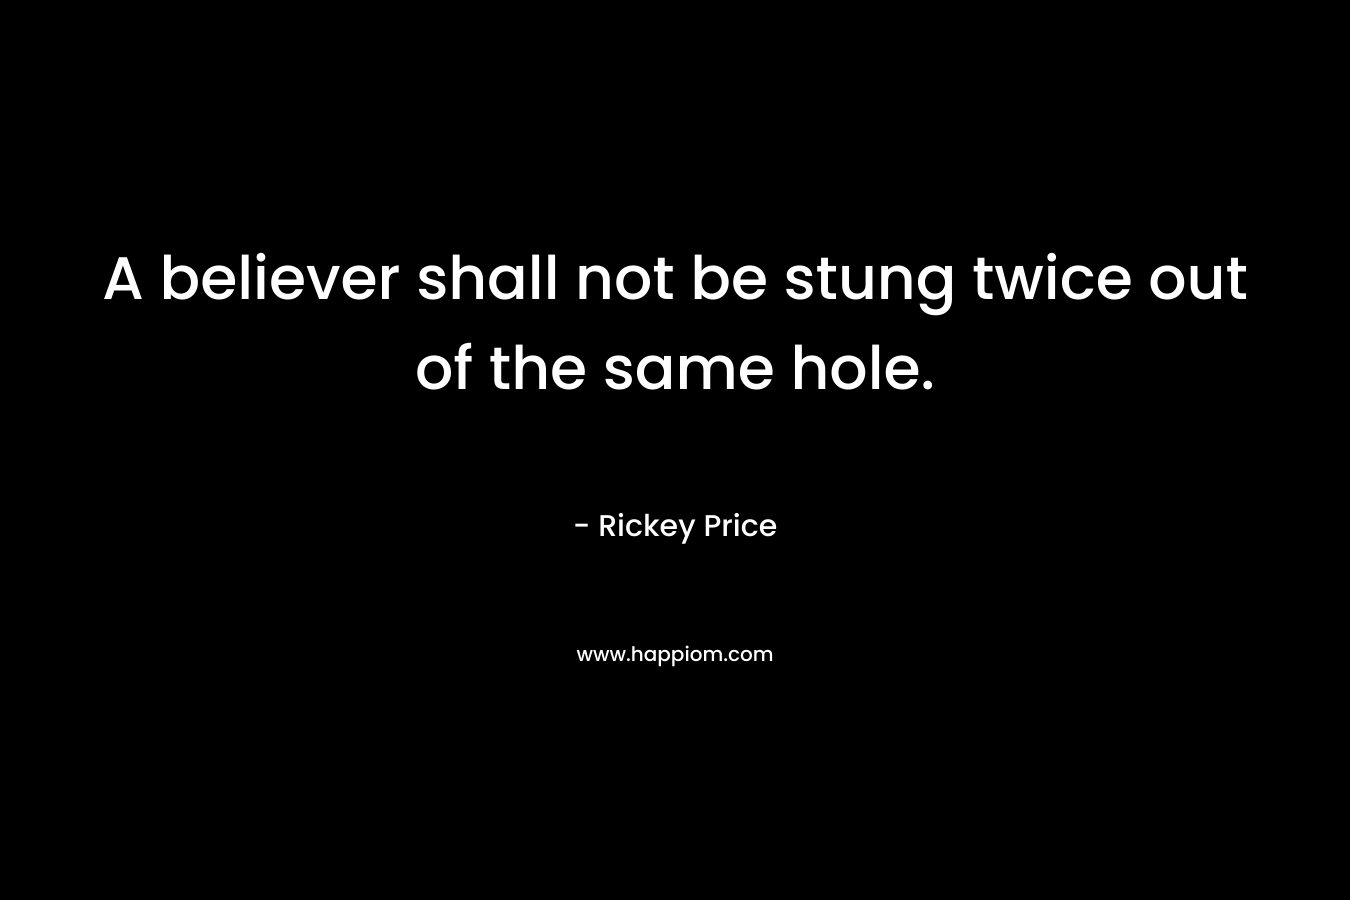 A believer shall not be stung twice out of the same hole.